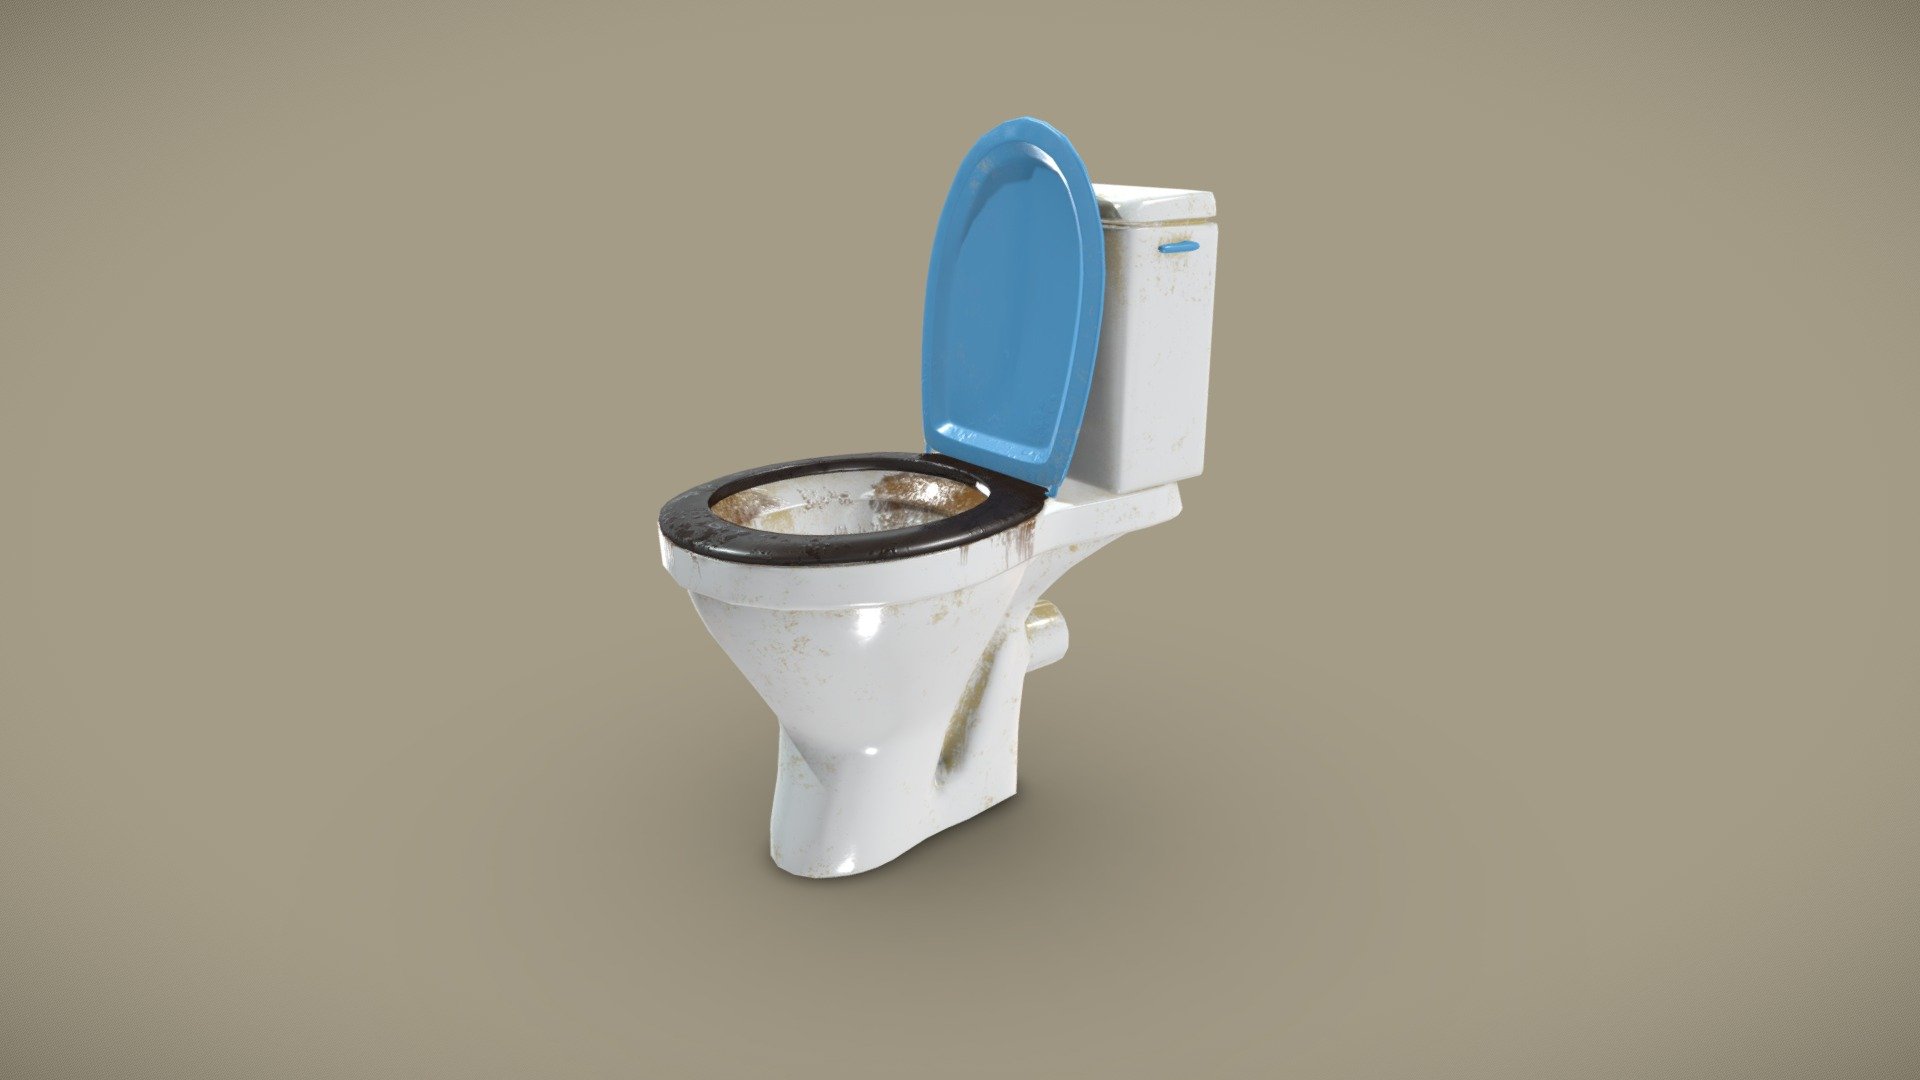 A toilet that has been used by unscrupulous people

textured in susbtance painter with high to low, modeled in blender.

ue4 packed textures included (rar file) - Dirty toilet - 3D model by oooFFFFEDDMODELS (@pierre.marcos.19) 3d model